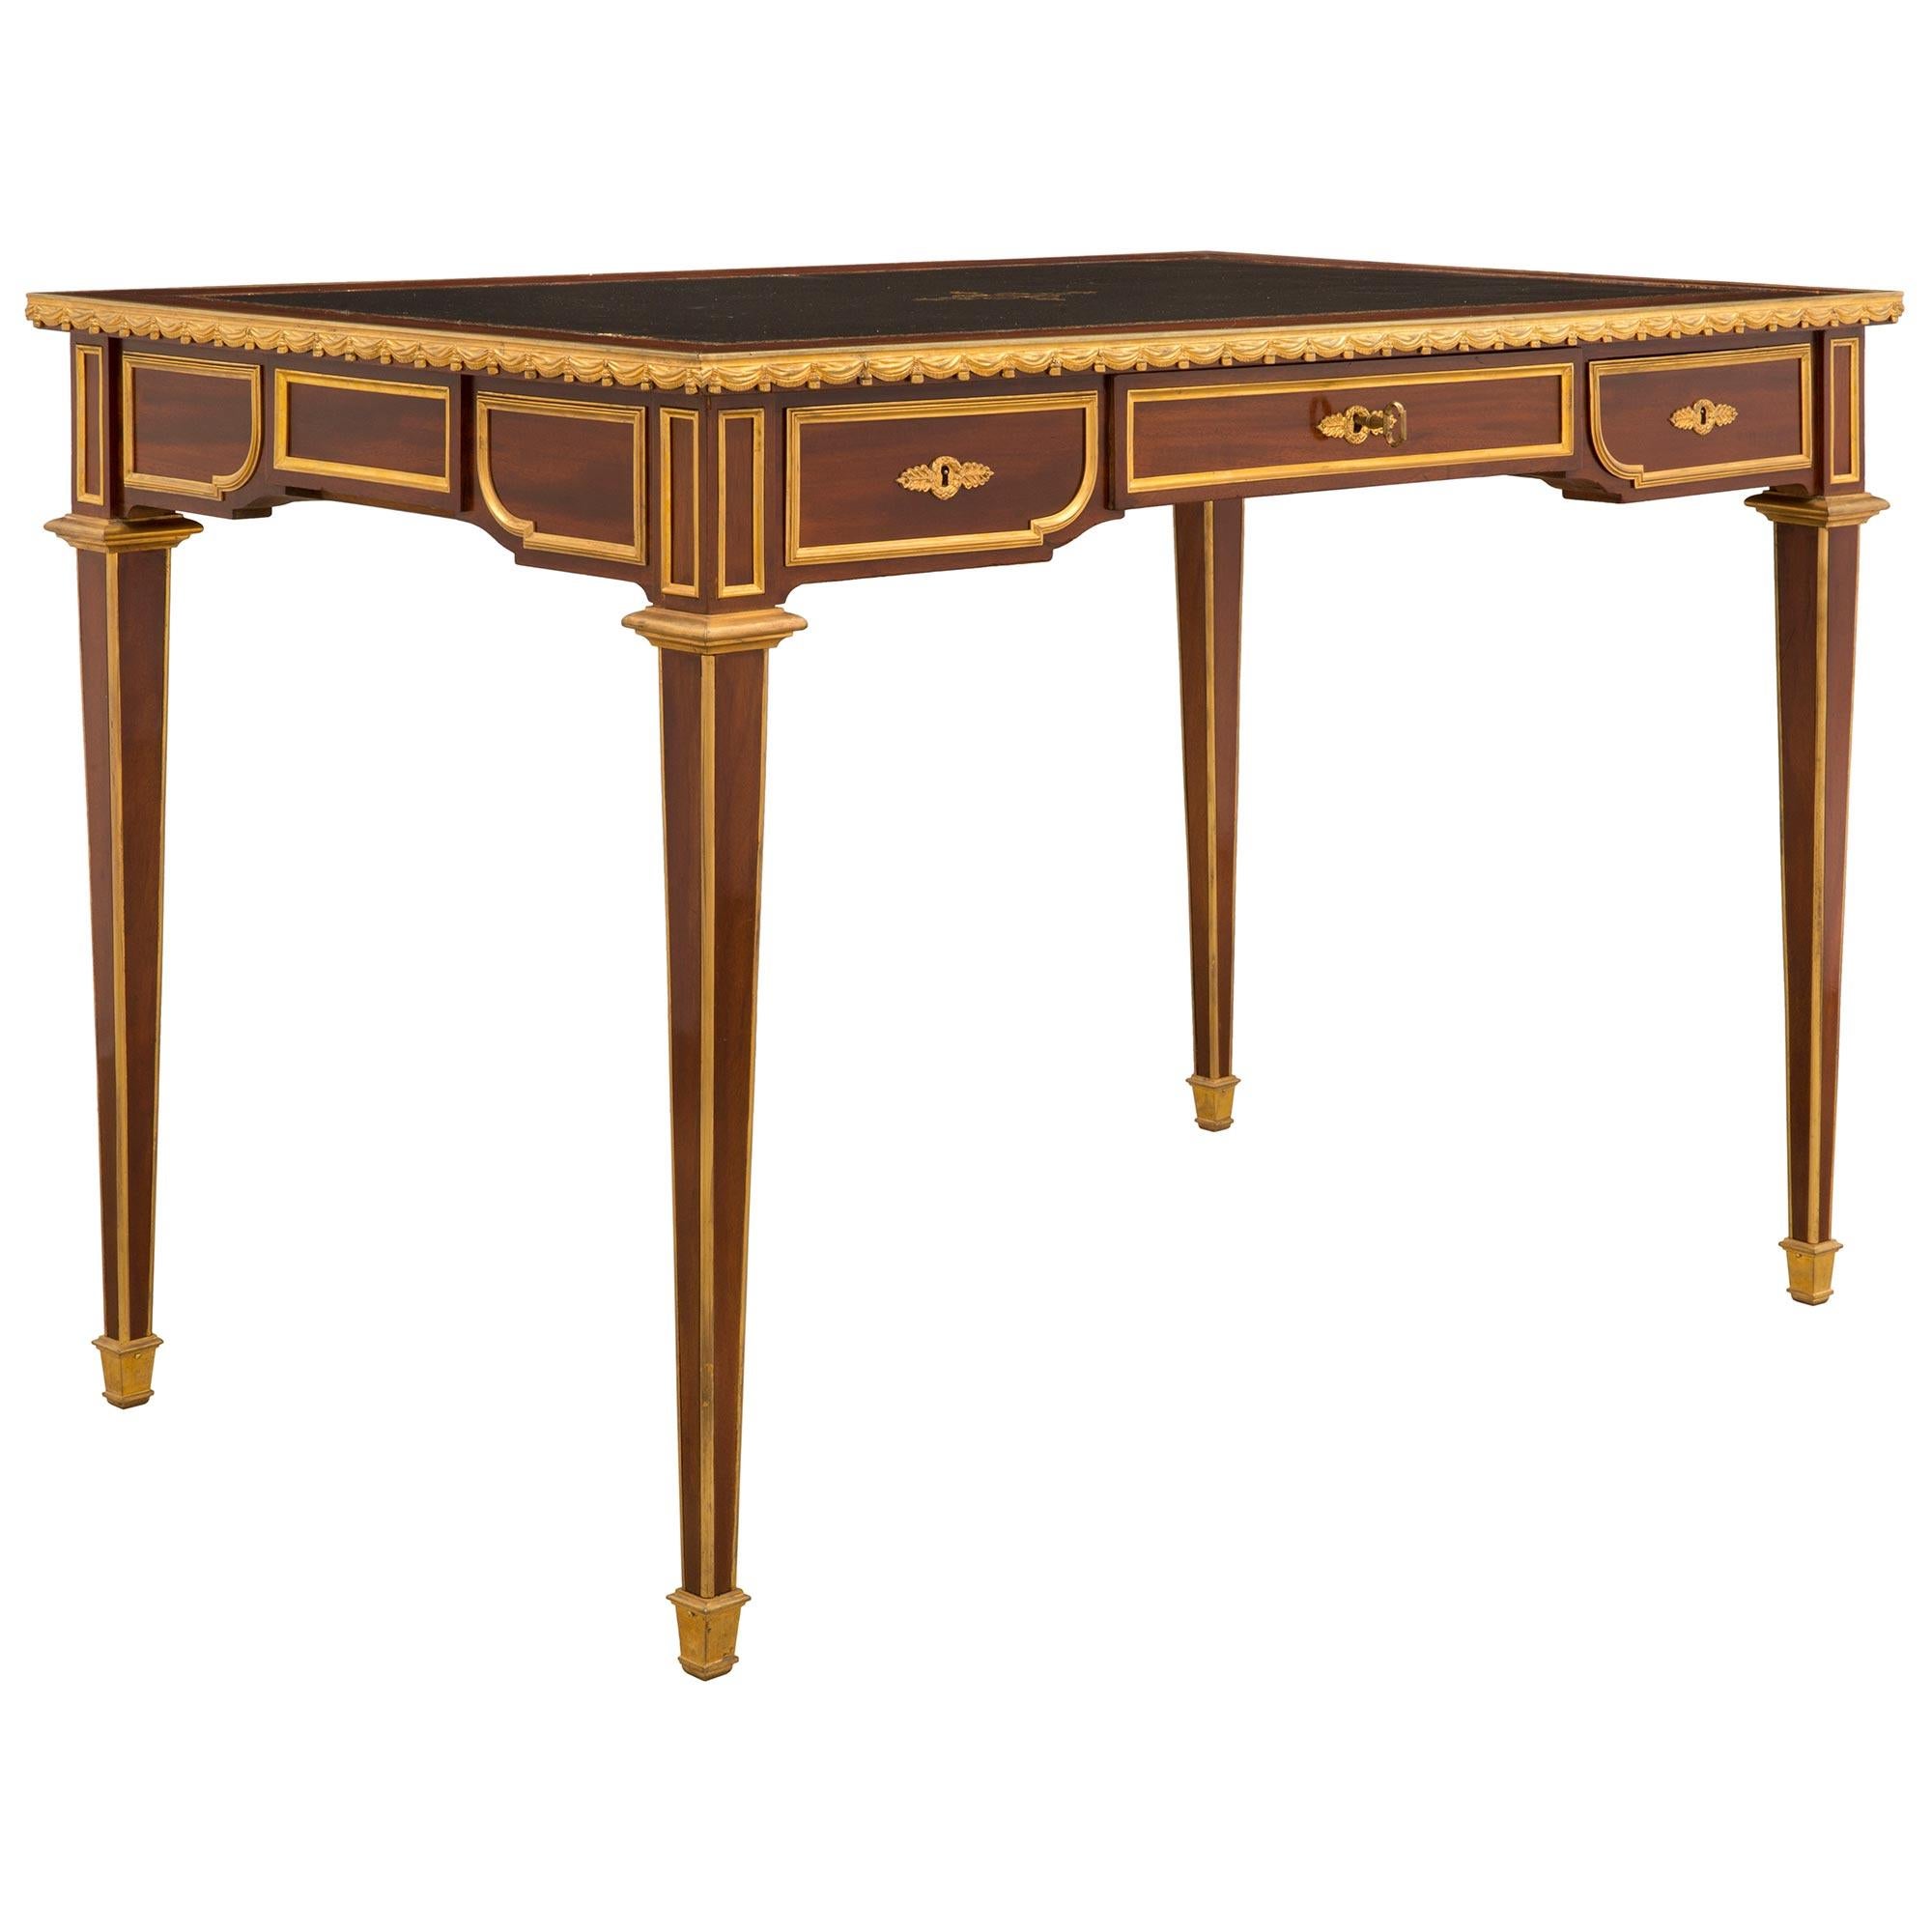 French 19th Century Louis XVI Style Mahogany and Ormolu Desk In Good Condition For Sale In West Palm Beach, FL